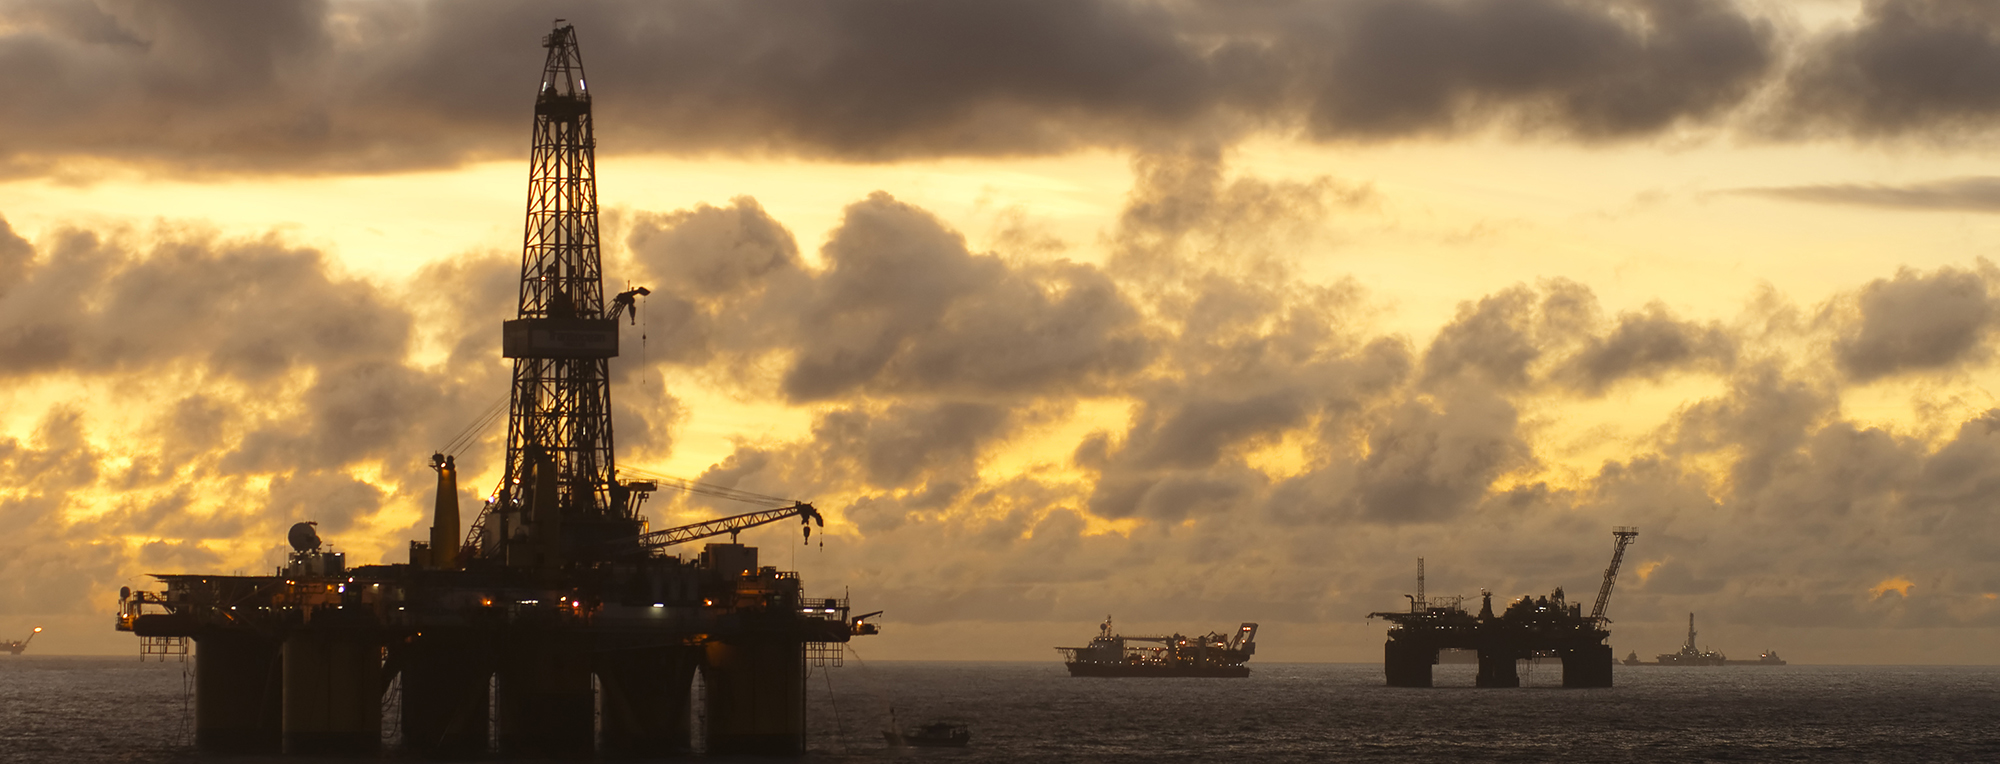 offshore oil field at sunset